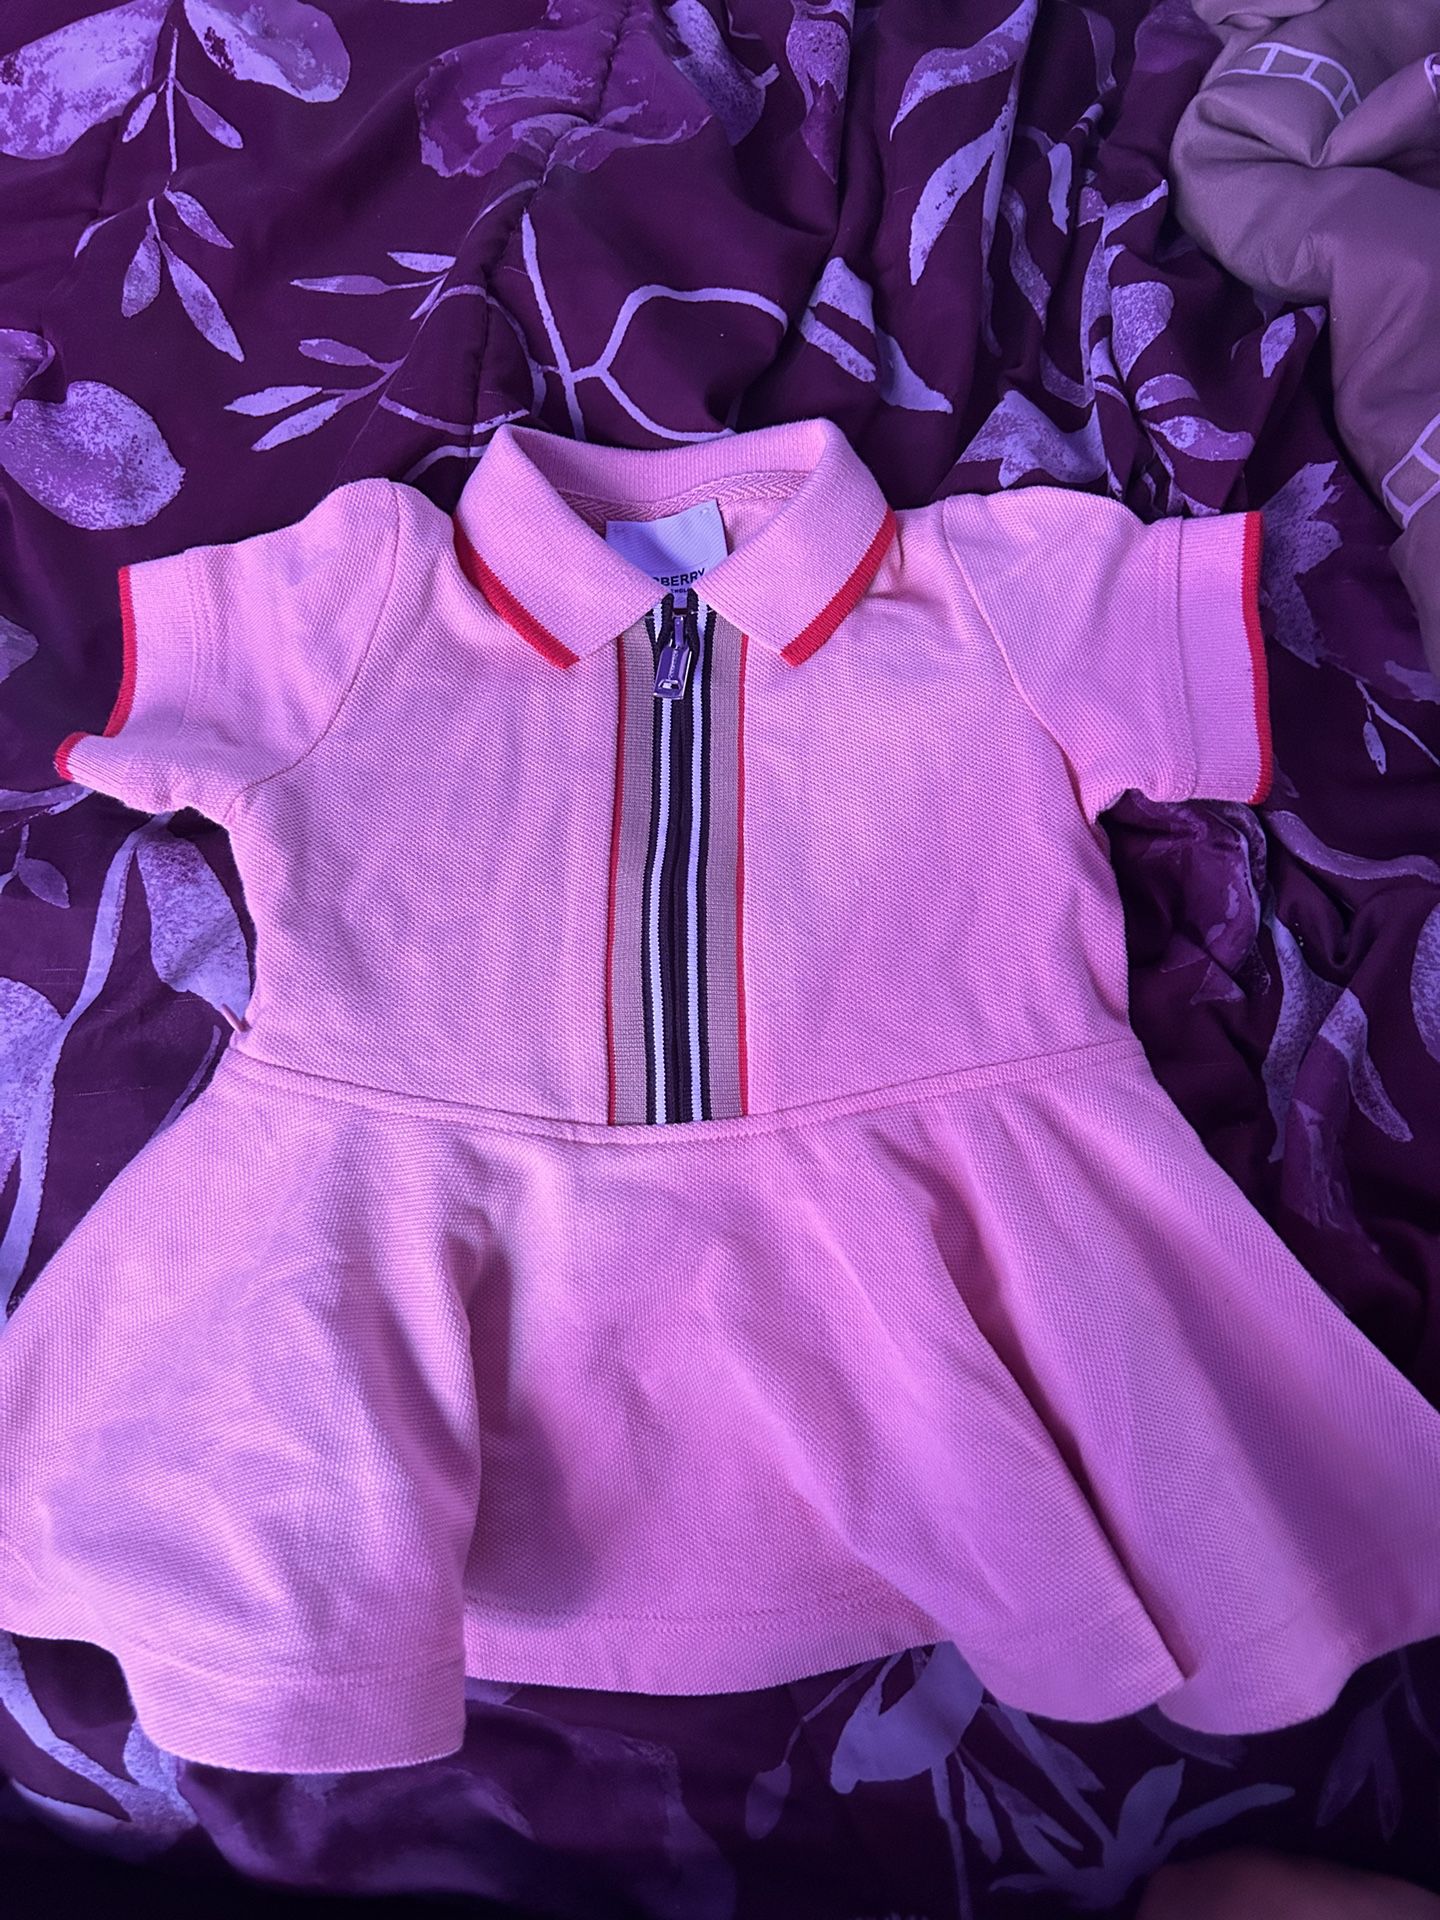 Burberry Baby Girls Cotton Check Placket Polo Dress for Sale in Detroit, MI  - OfferUp